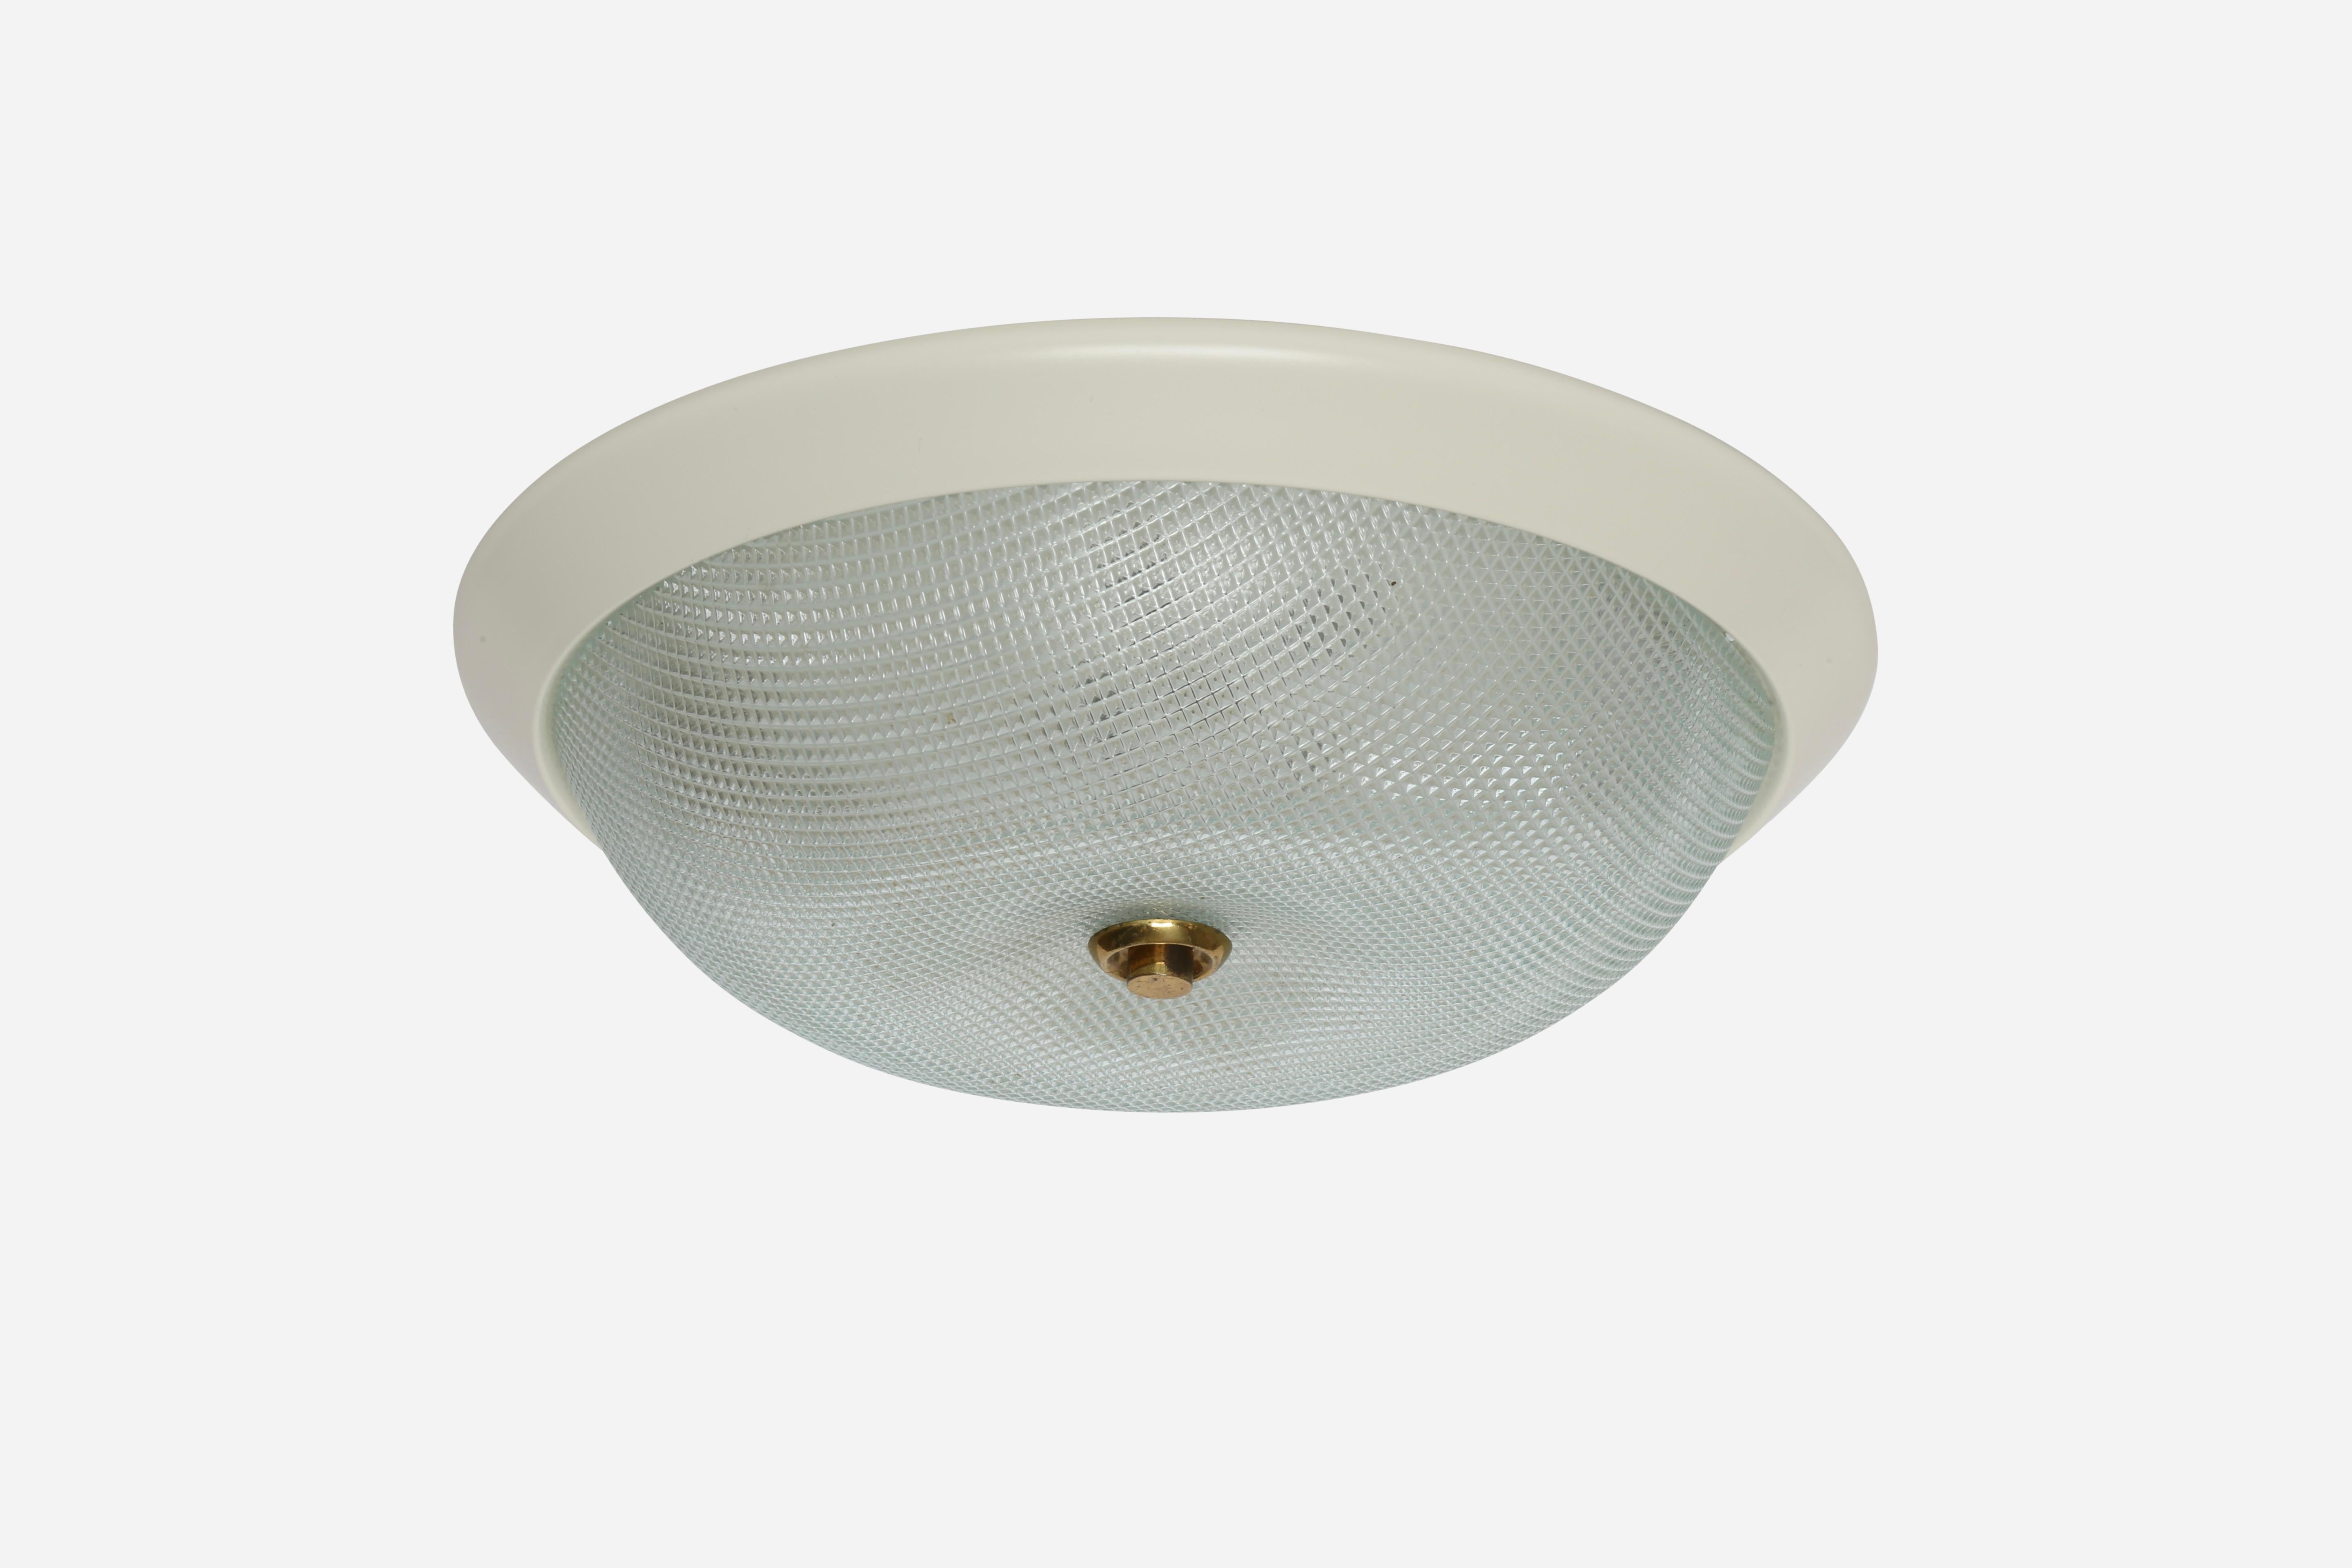 Mid-century modern flush mount ceiling light.
Designed and made in Italy in 1960s
Textured glass, enameled metal, brass.
Takes 3 candelabra bulbs.
Complimentary US rewiring upon request.
Restored.

